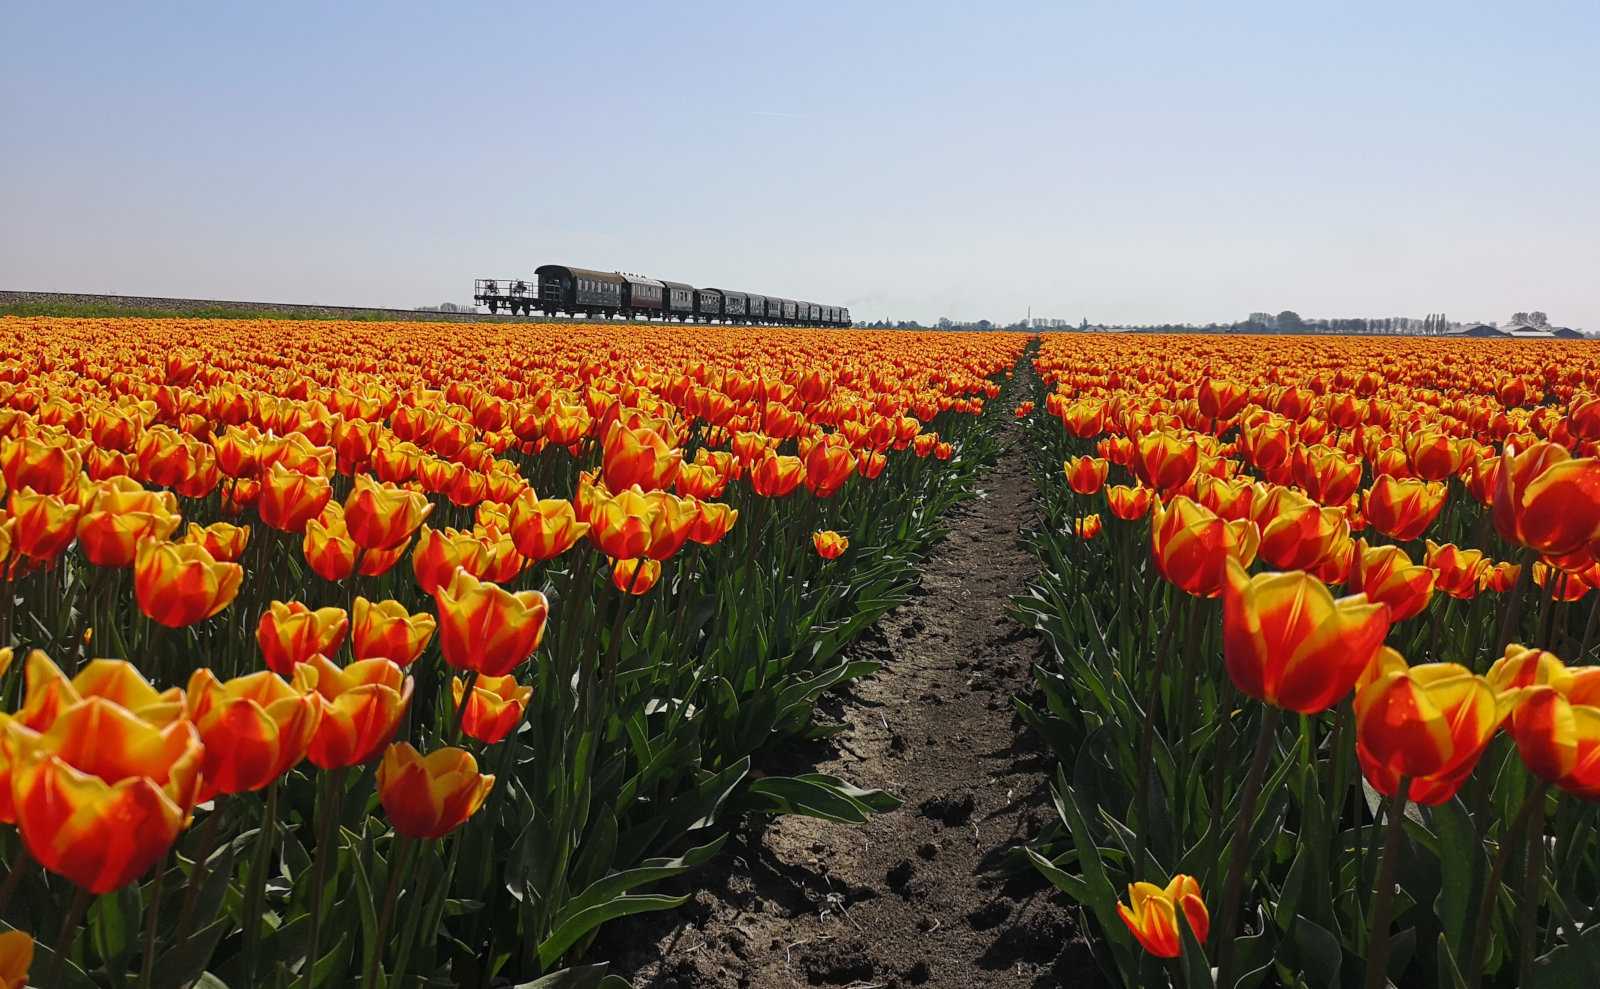 What it's like to ride the Dutch museum steam train and where to get photos of it with tulip fields